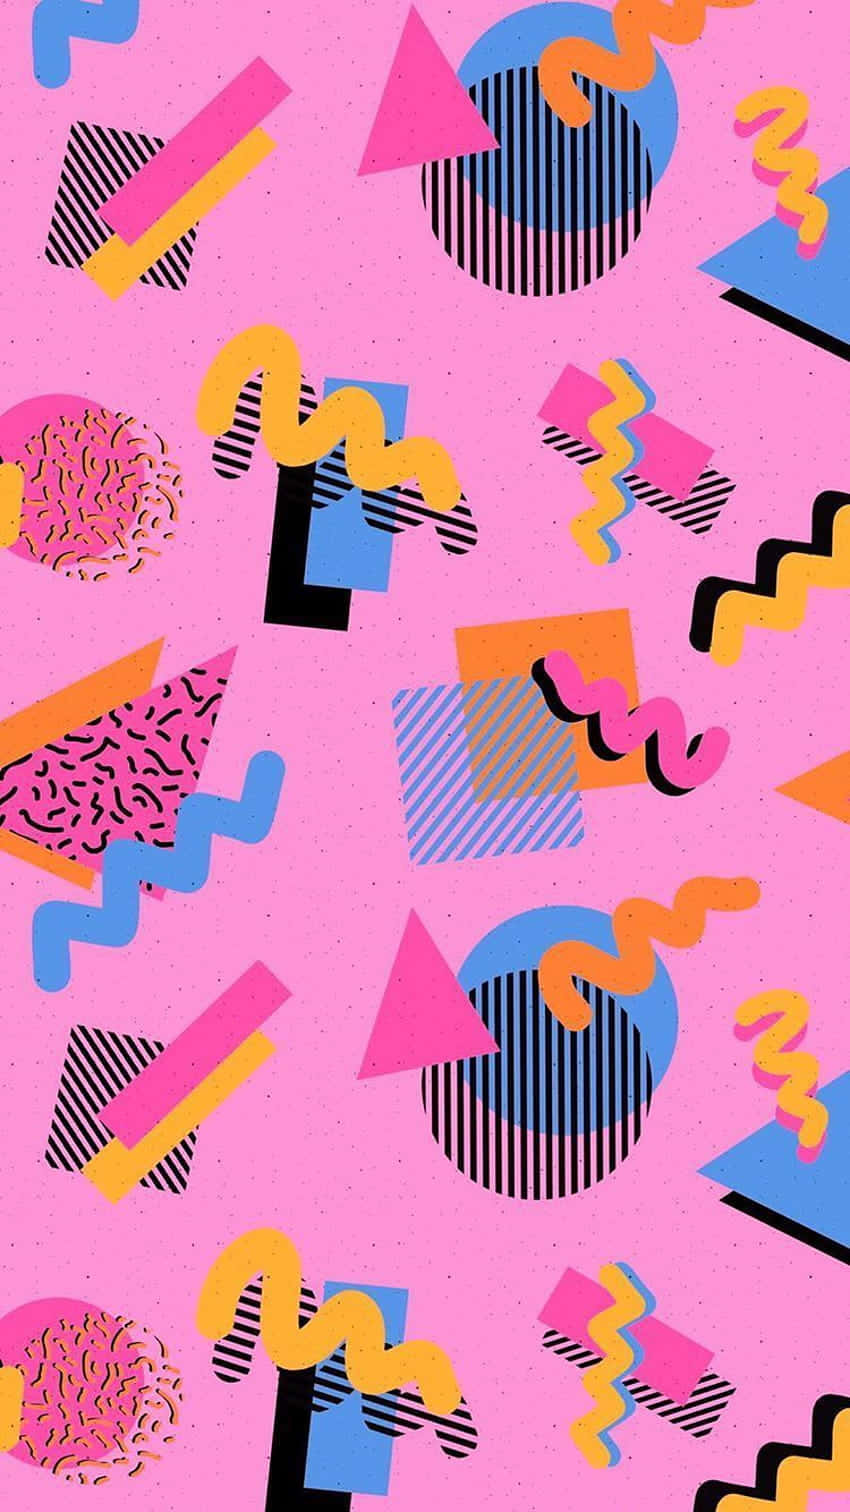 Take a trip back in time with this colorful and quirky Retro 90s background